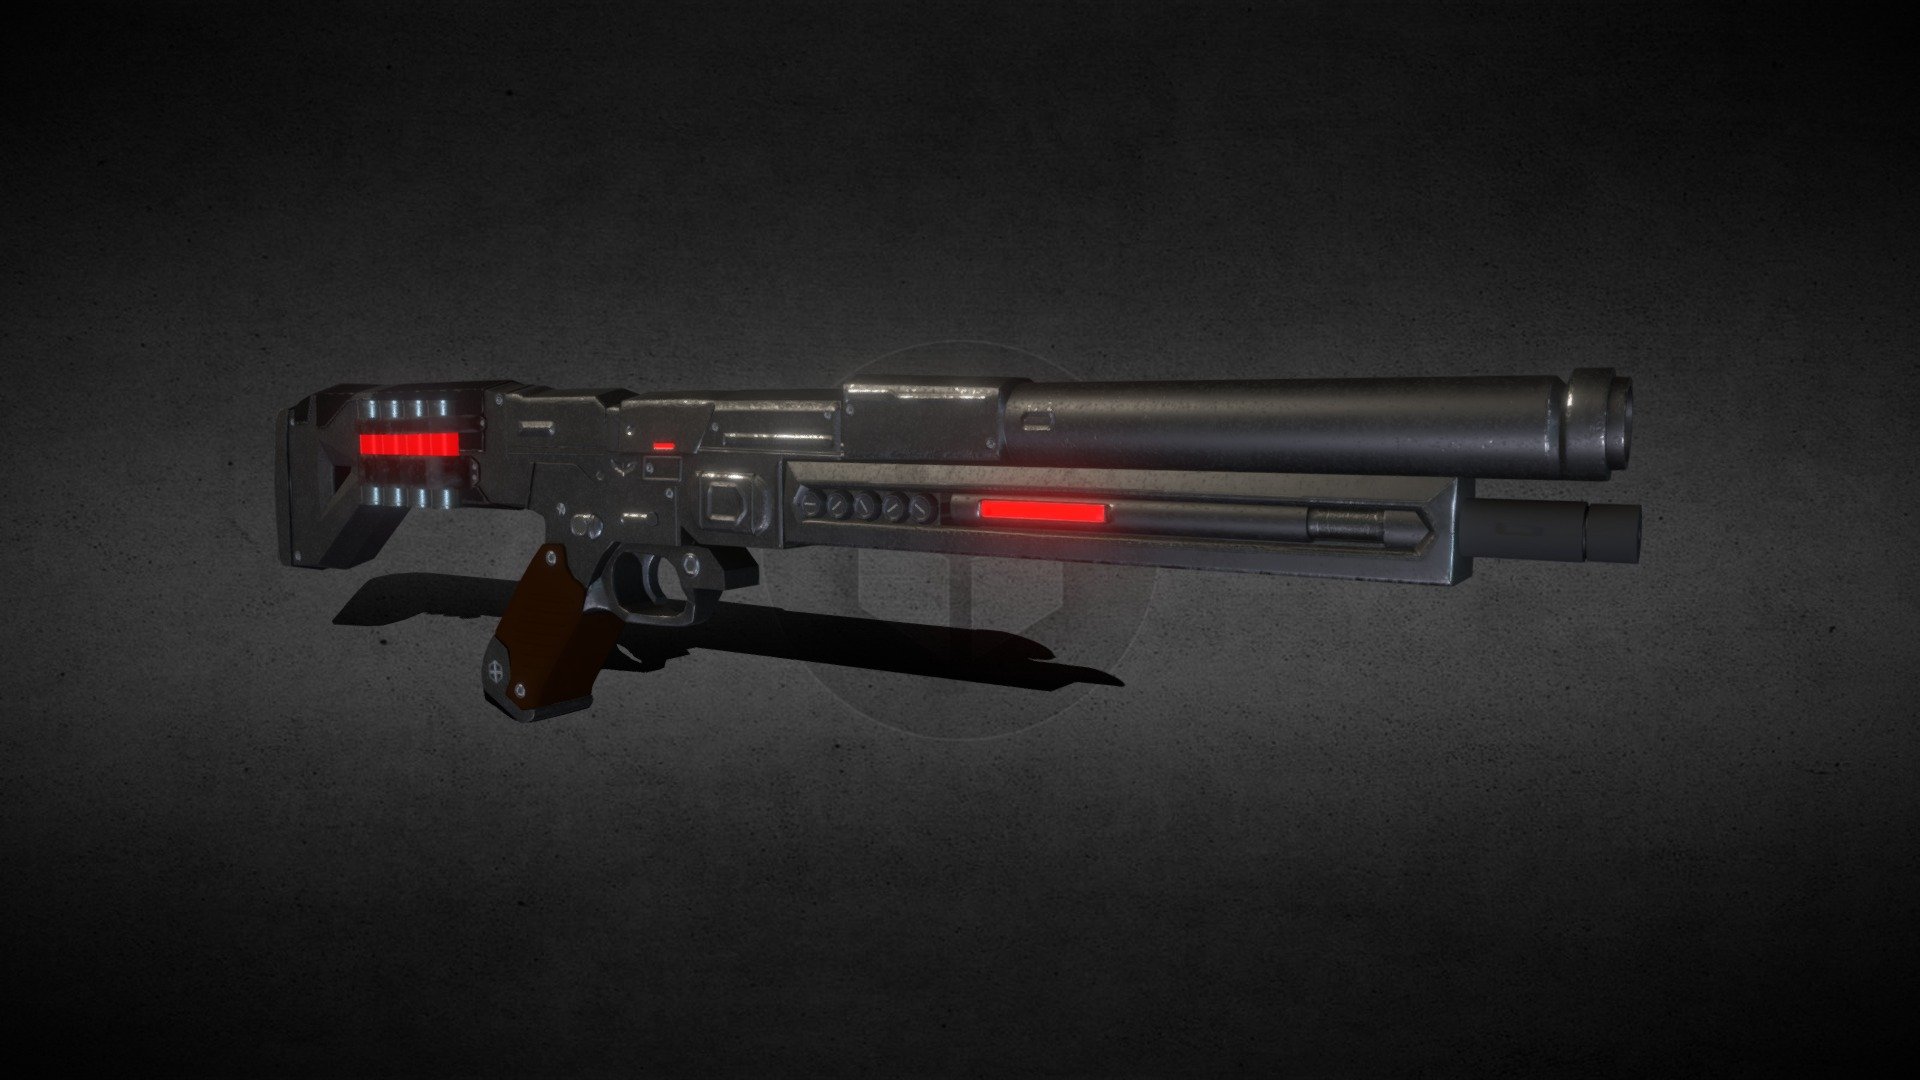 A SCI-FI Shotgun inspired by some parts of real parts of some weapons this weapon was one of my first experience as a weapon artist was made for a canceled Indie game inspired by resident evil but in a sci-fi setting it is ready for a game engine it has 5800 verts 5406 polys and 10702 tris and the texture are 2048 x 2048 the textures are PBR and .PNG it is Diffuse. Emissive, Metallic, Roughness and Normal Map - SCI-FI Shotgun - Buy Royalty Free 3D model by paburoviii 3d model